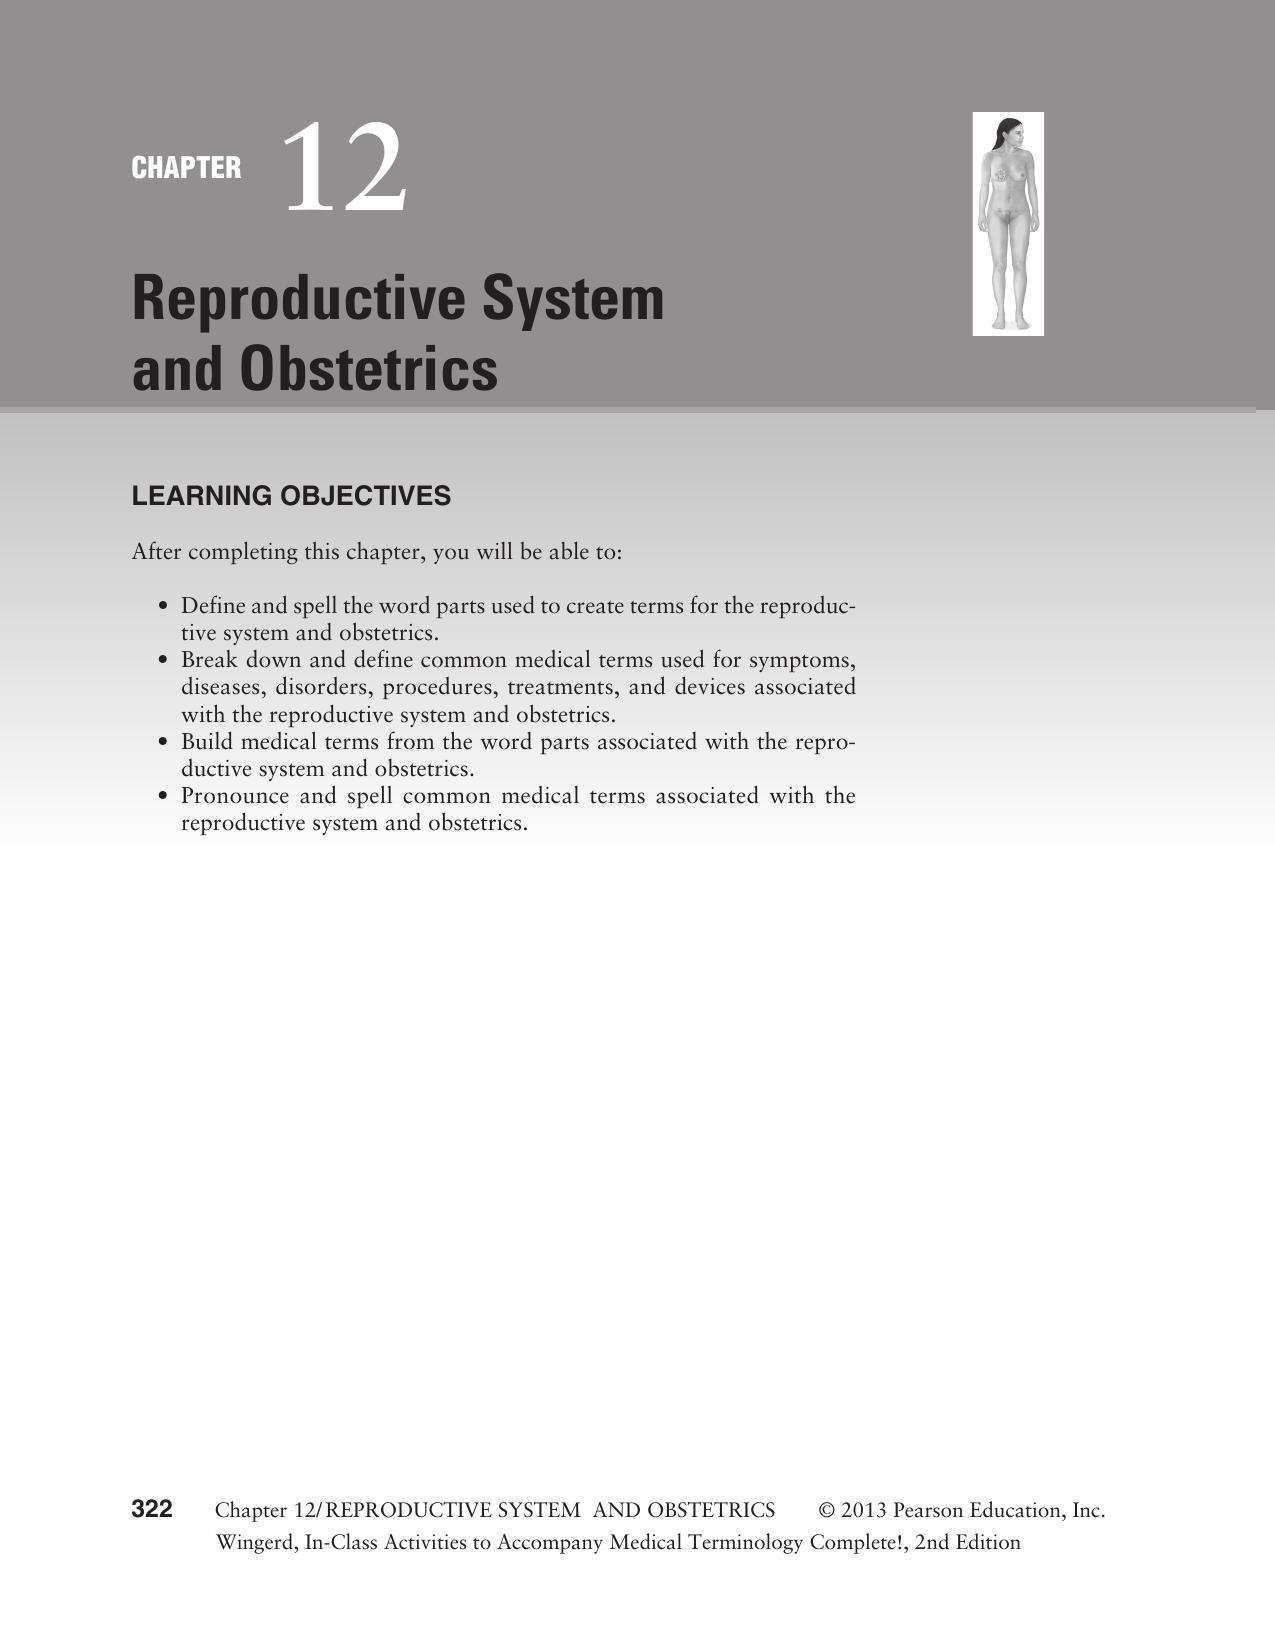 Reproductive System and Obstetrics